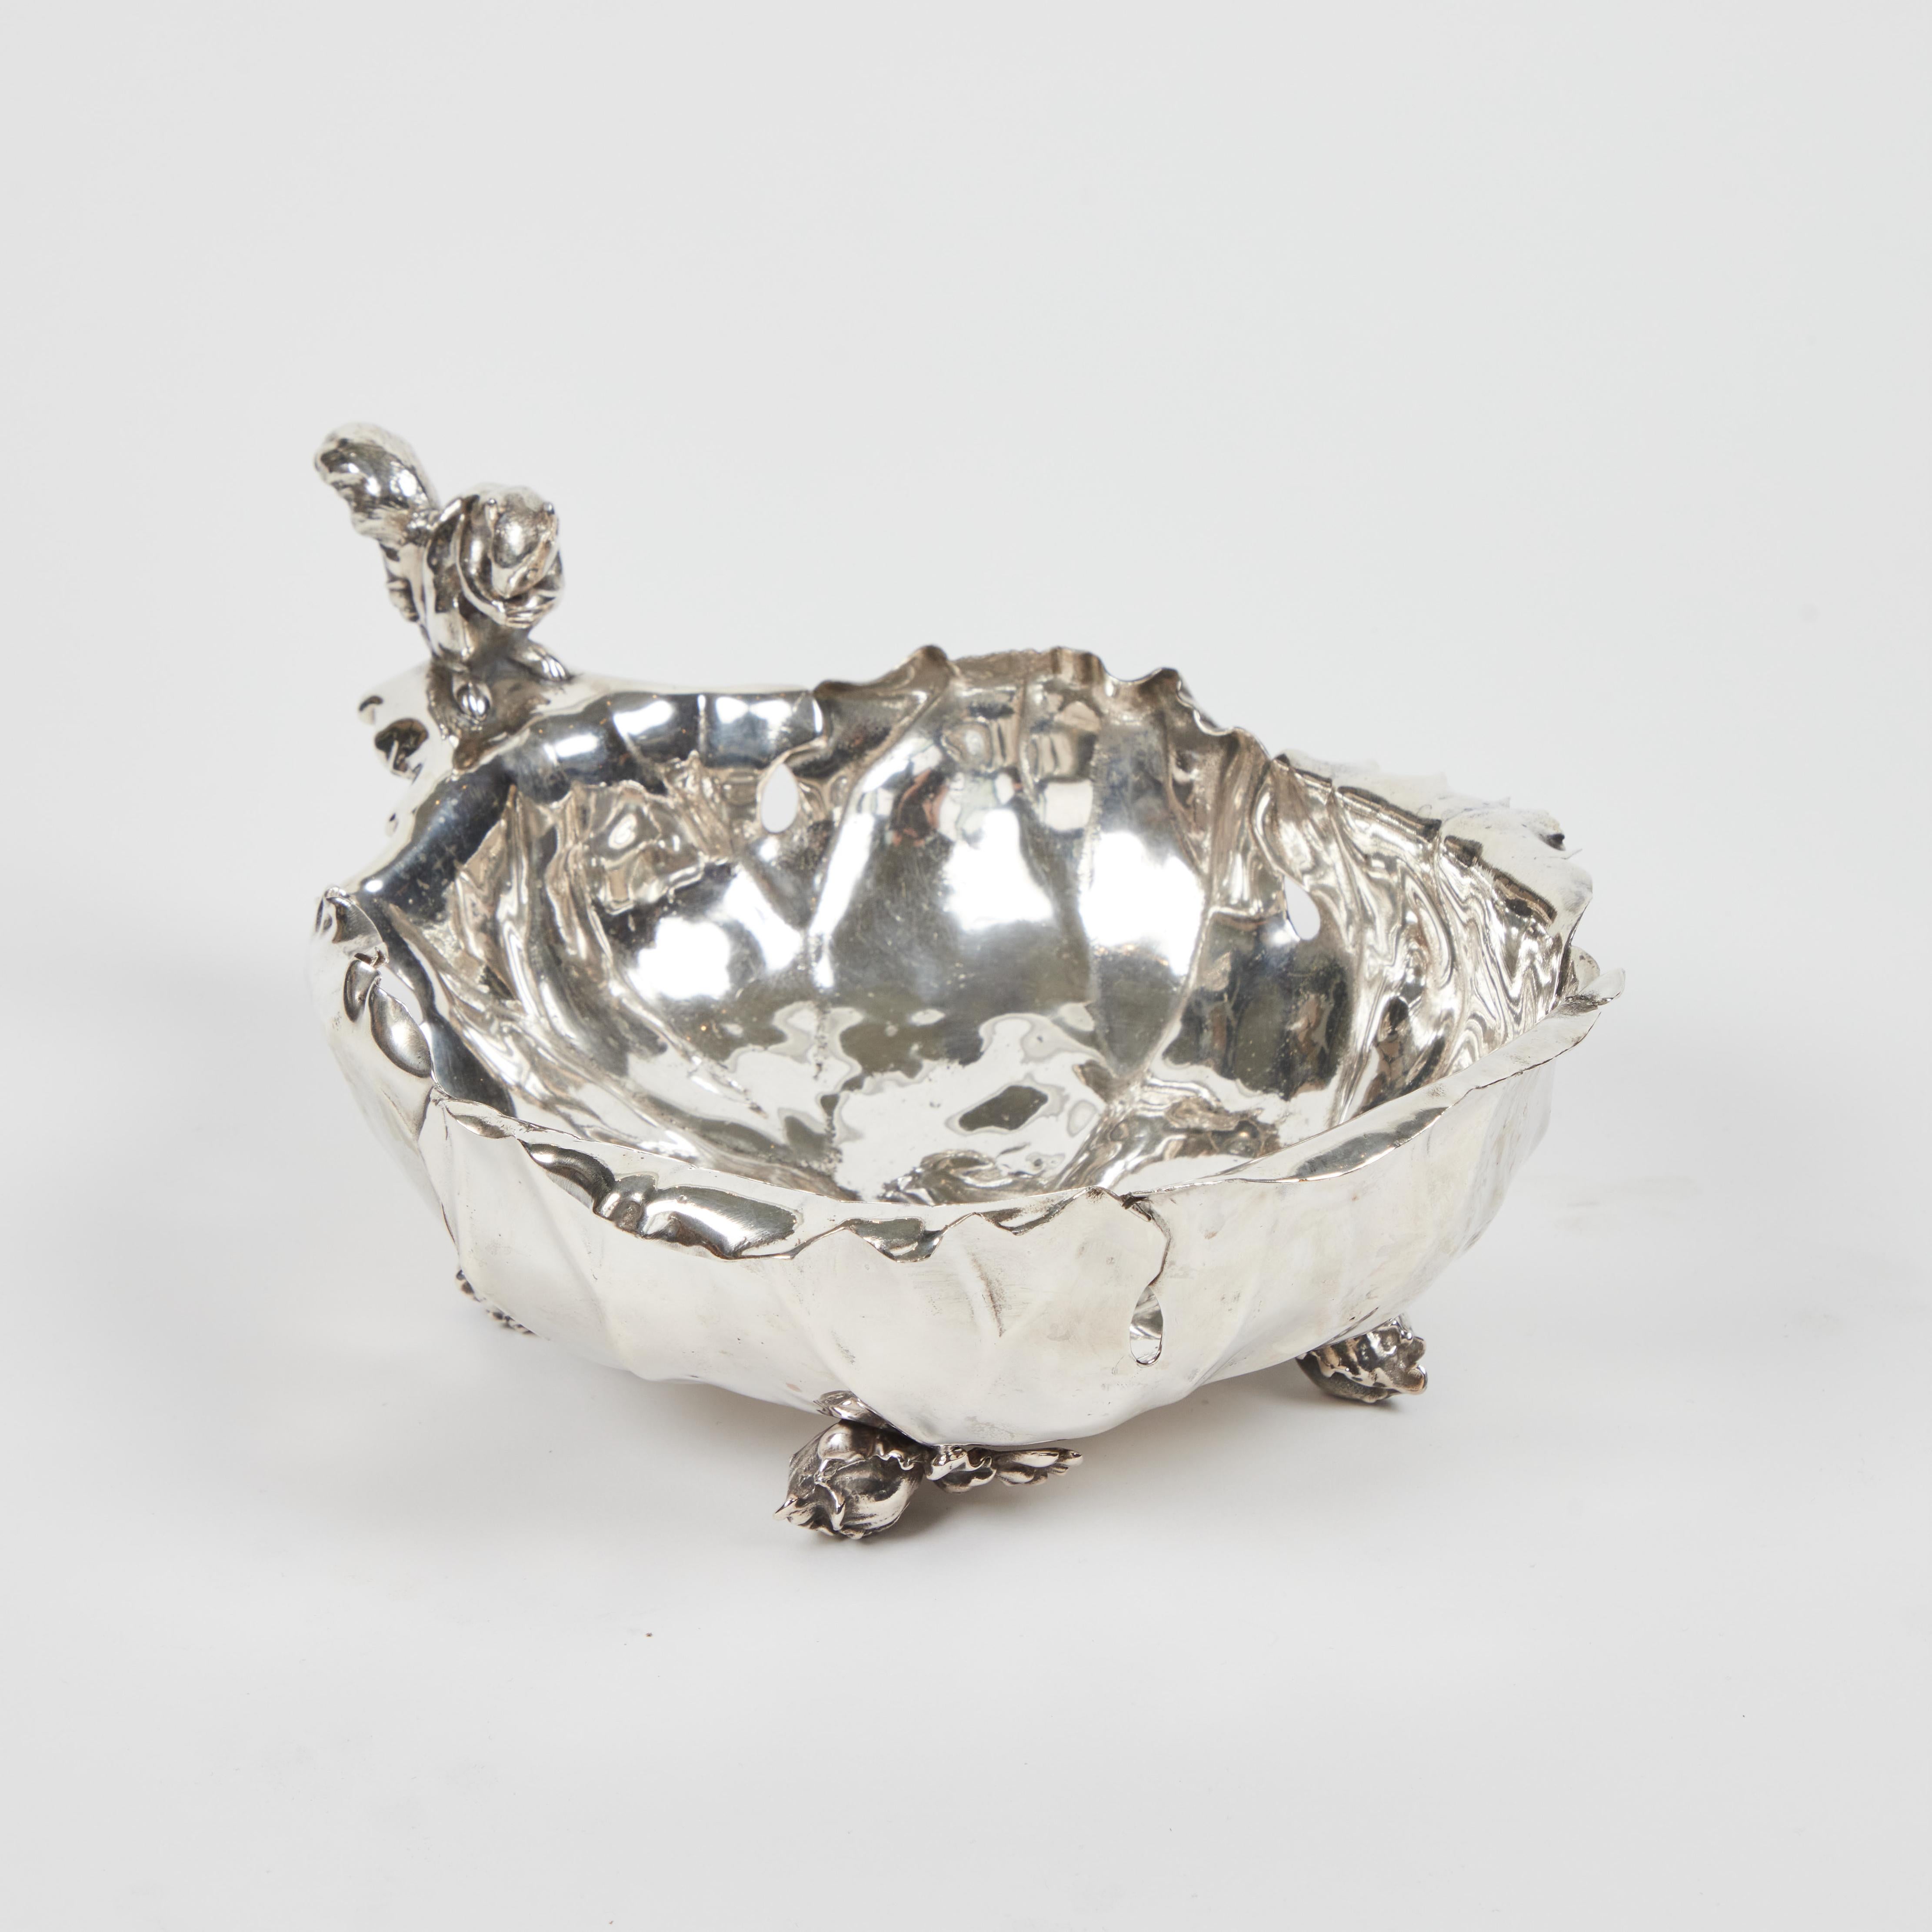 Made by the Pairpoint Manufacturing Co. Circa 1880-1900. This figural leaf form dish has a detailed figure of a squirrel holding a nut as a handle with a branch form support, it rests on four figural leaf bud feet. It is stamped at the bottom,